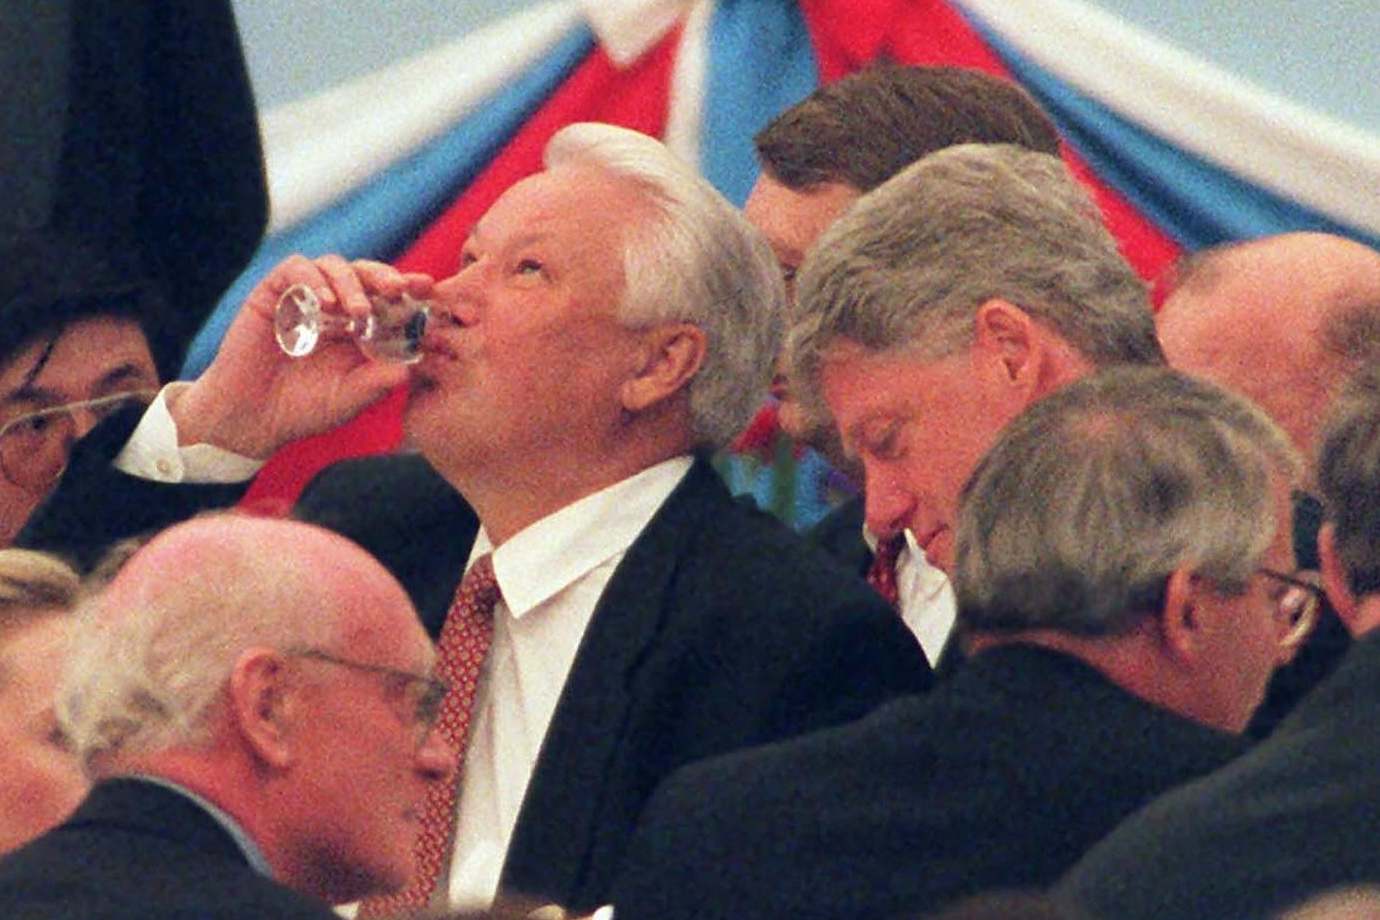 The proposal to make Russia an 'associate member' of Nato came at the same time that concerns about Boris Yeltsin's heart attacks and drinking prompted the drawing up of contingency plans in case he died in office